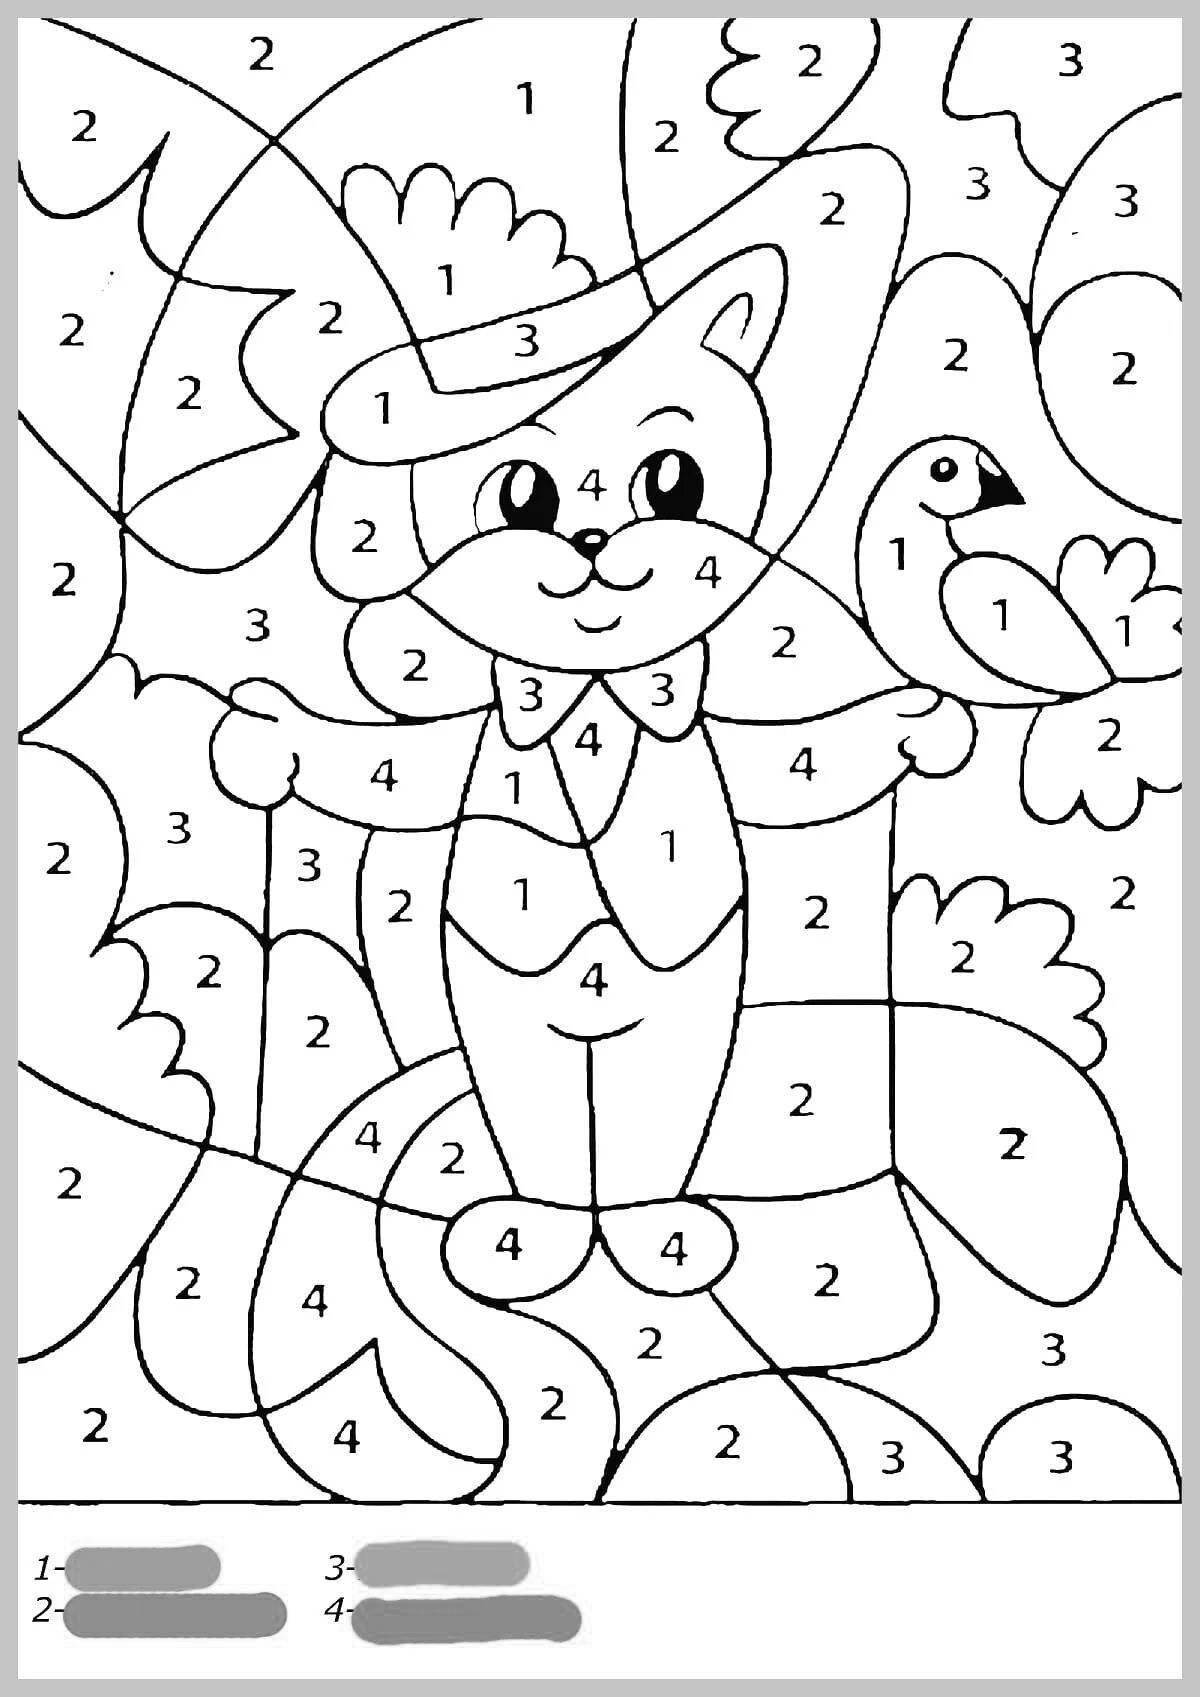 Fun coloring by numbers up to 10